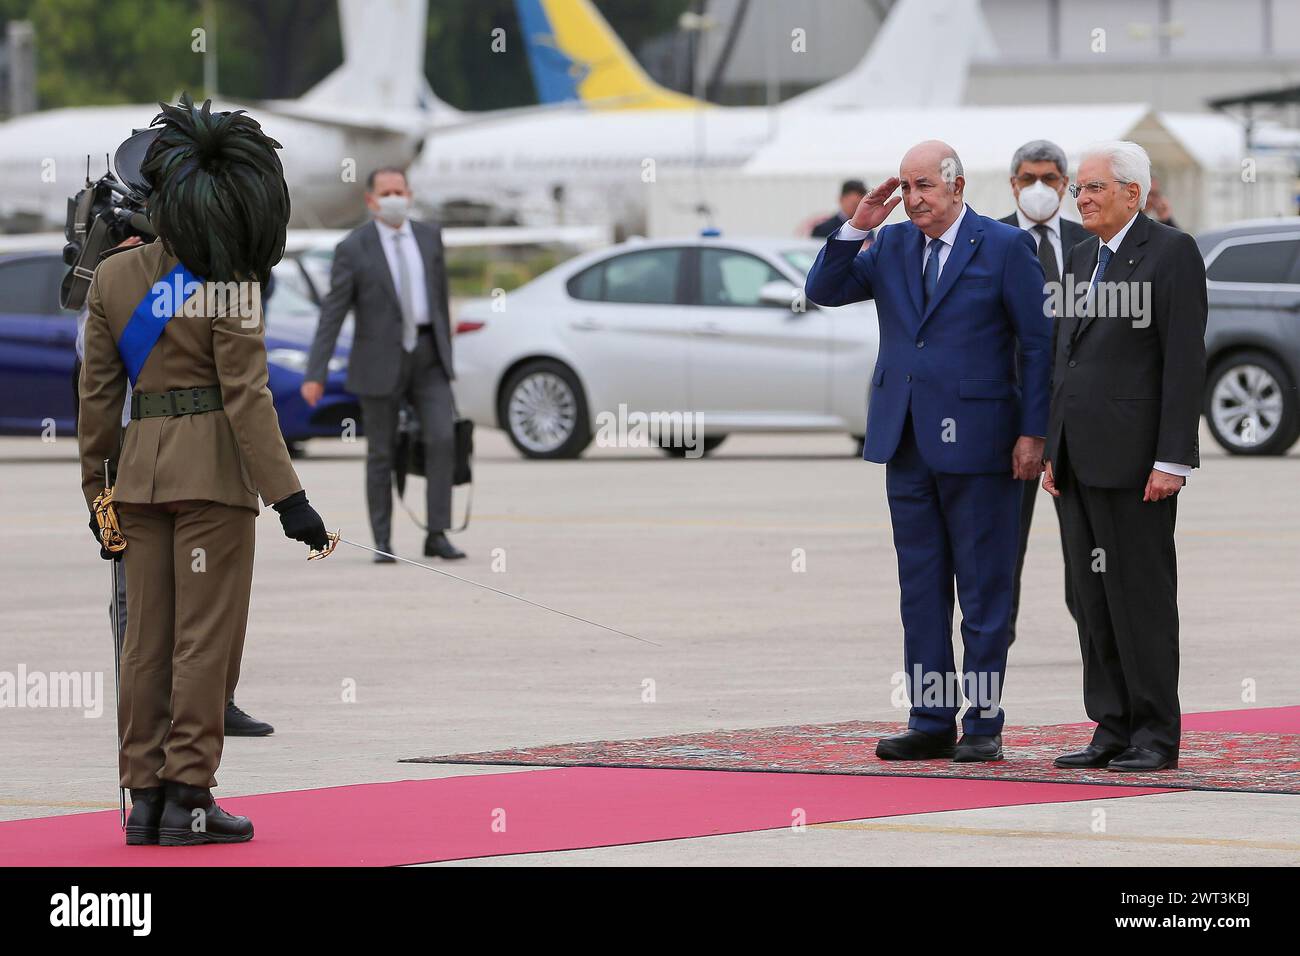 The president of Algeria, Abdelmadjid Tebboune (left), departing from Naples, arrives at the Capodichino airport for the military honors, together wit Stock Photo